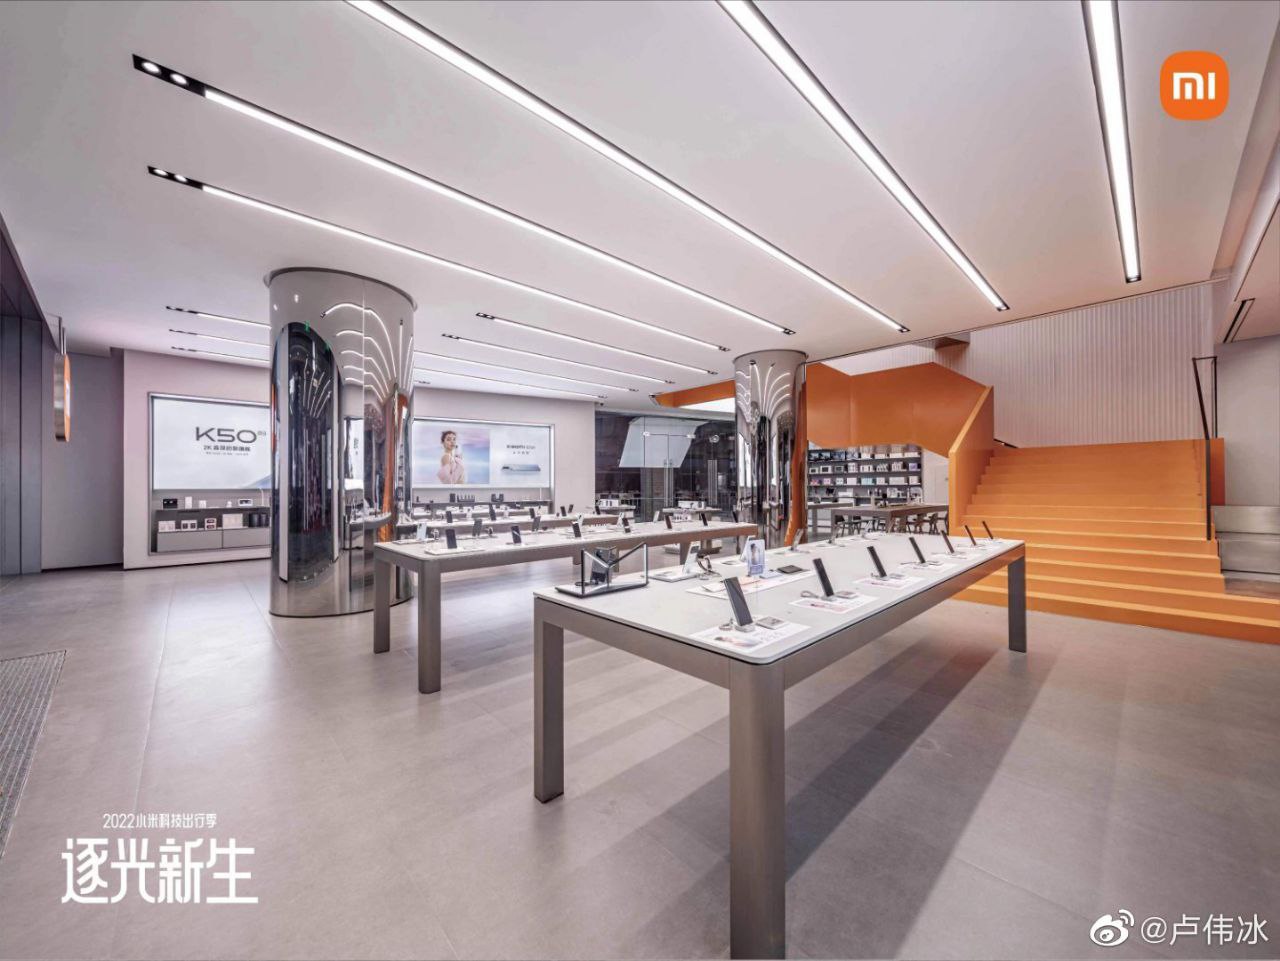 Xiaomi Homes largest flagship Store inside